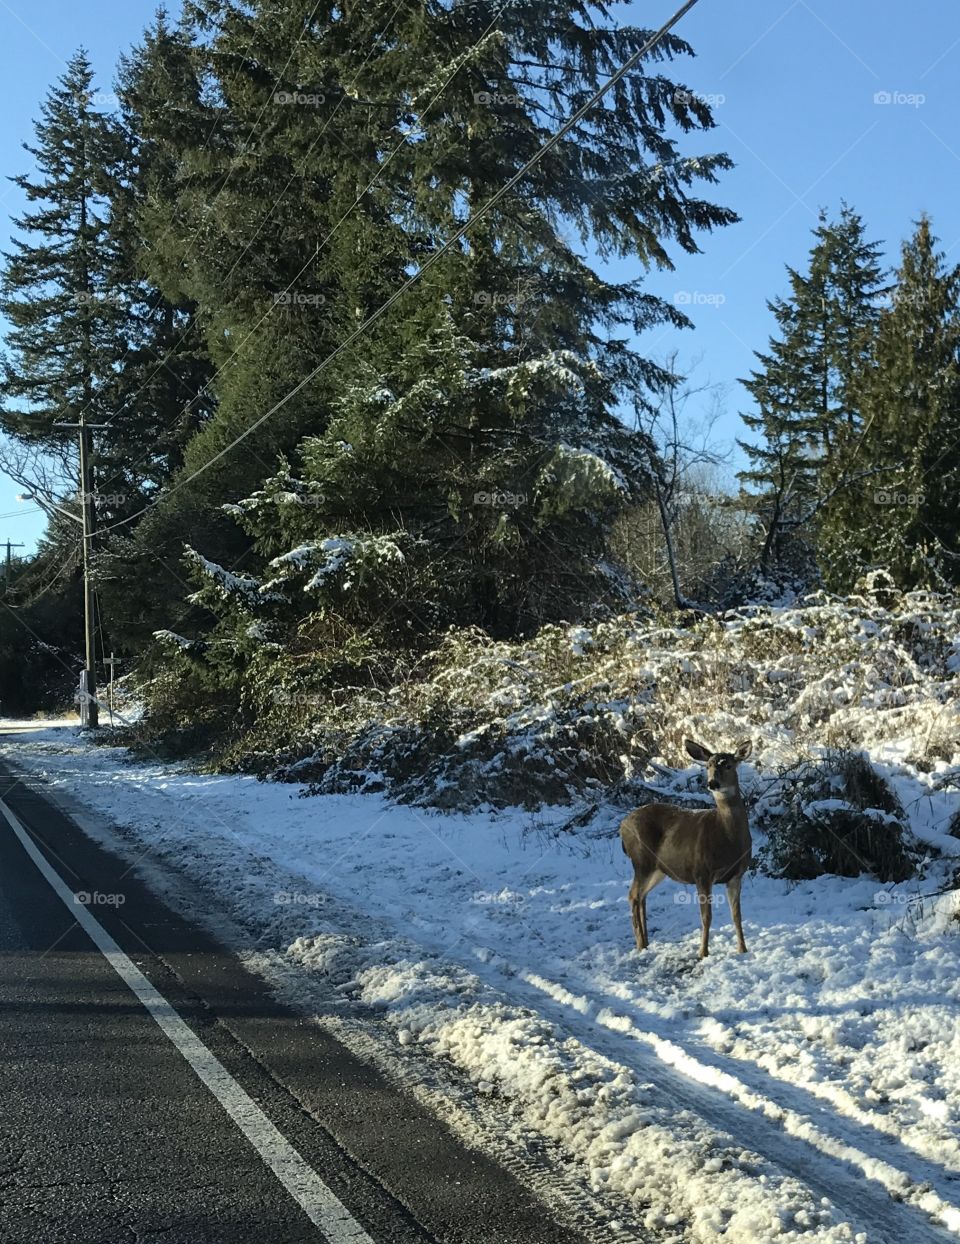 A Doe along the side of the road